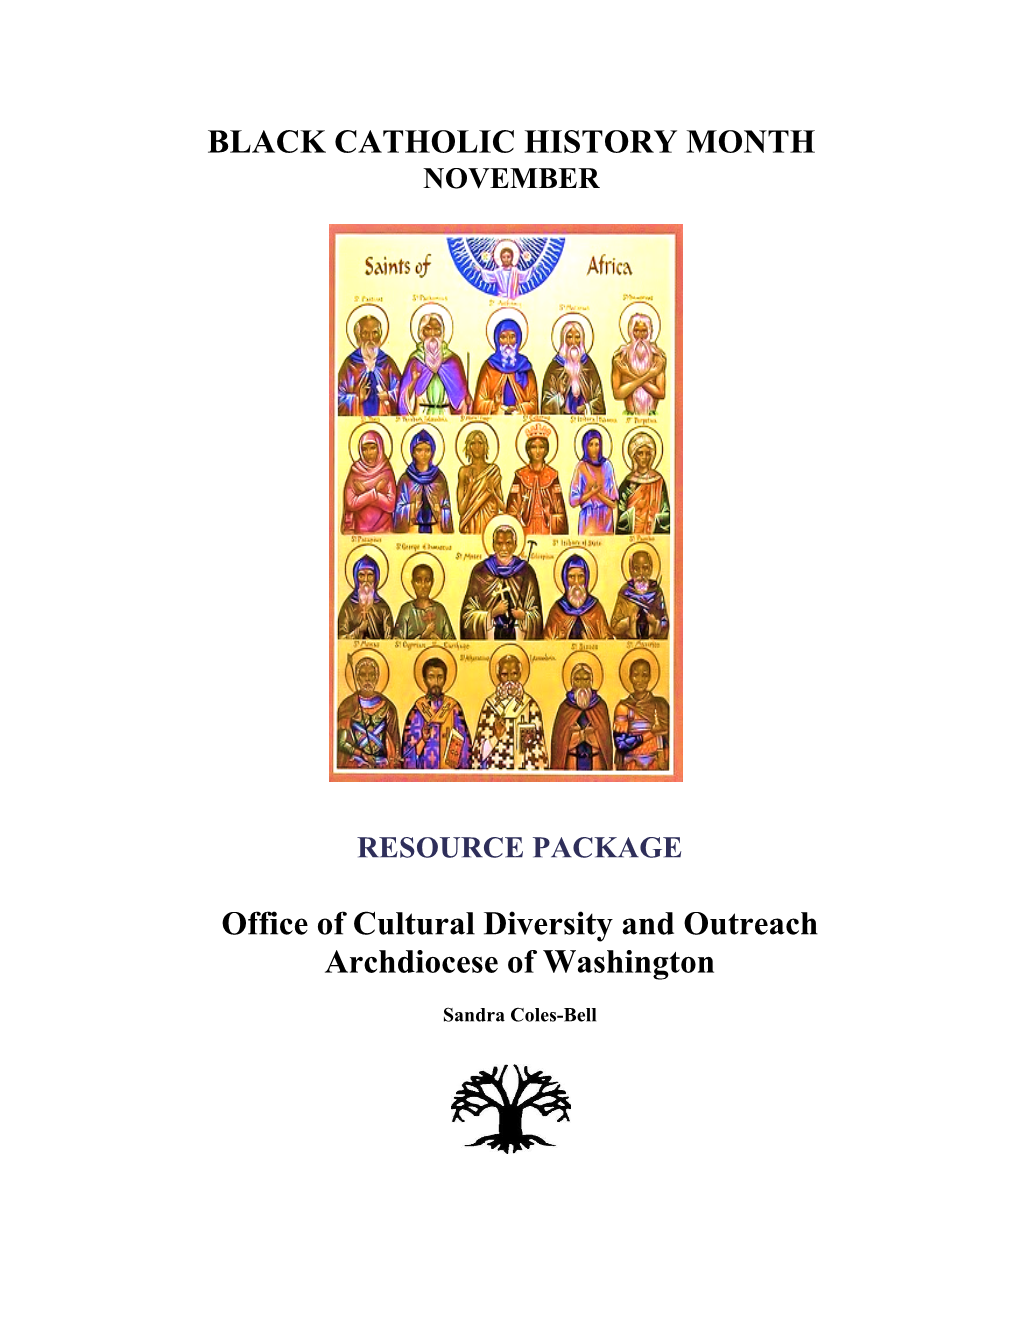 Office of Cultural Diversity and Outreach Archdiocese of Washington